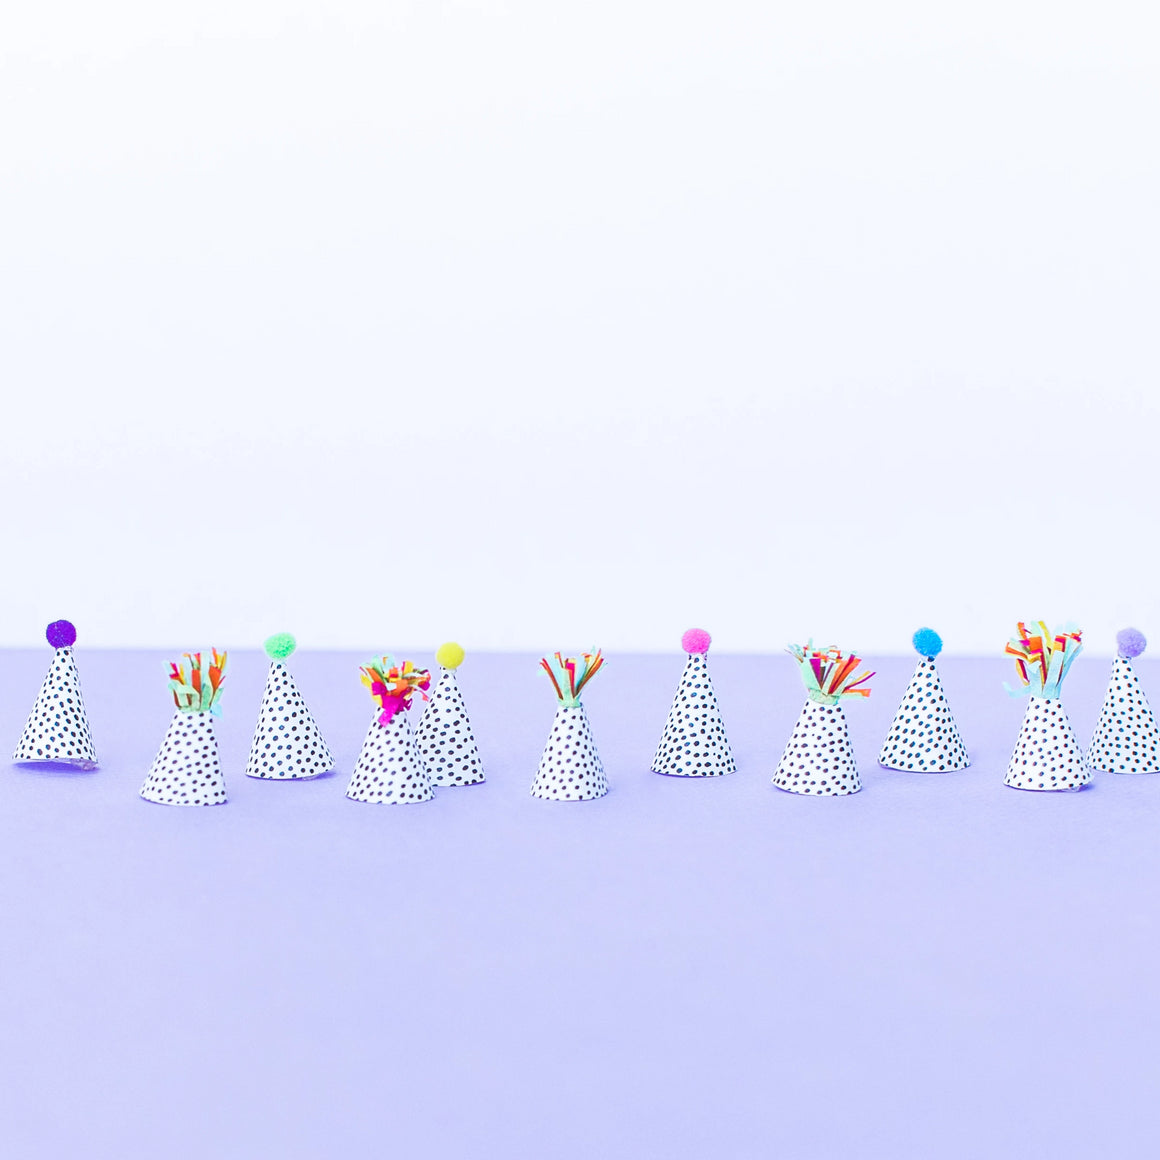 Twelve mini party hats with multi-color fringe and a mix of pom-pom colors used for party decor.